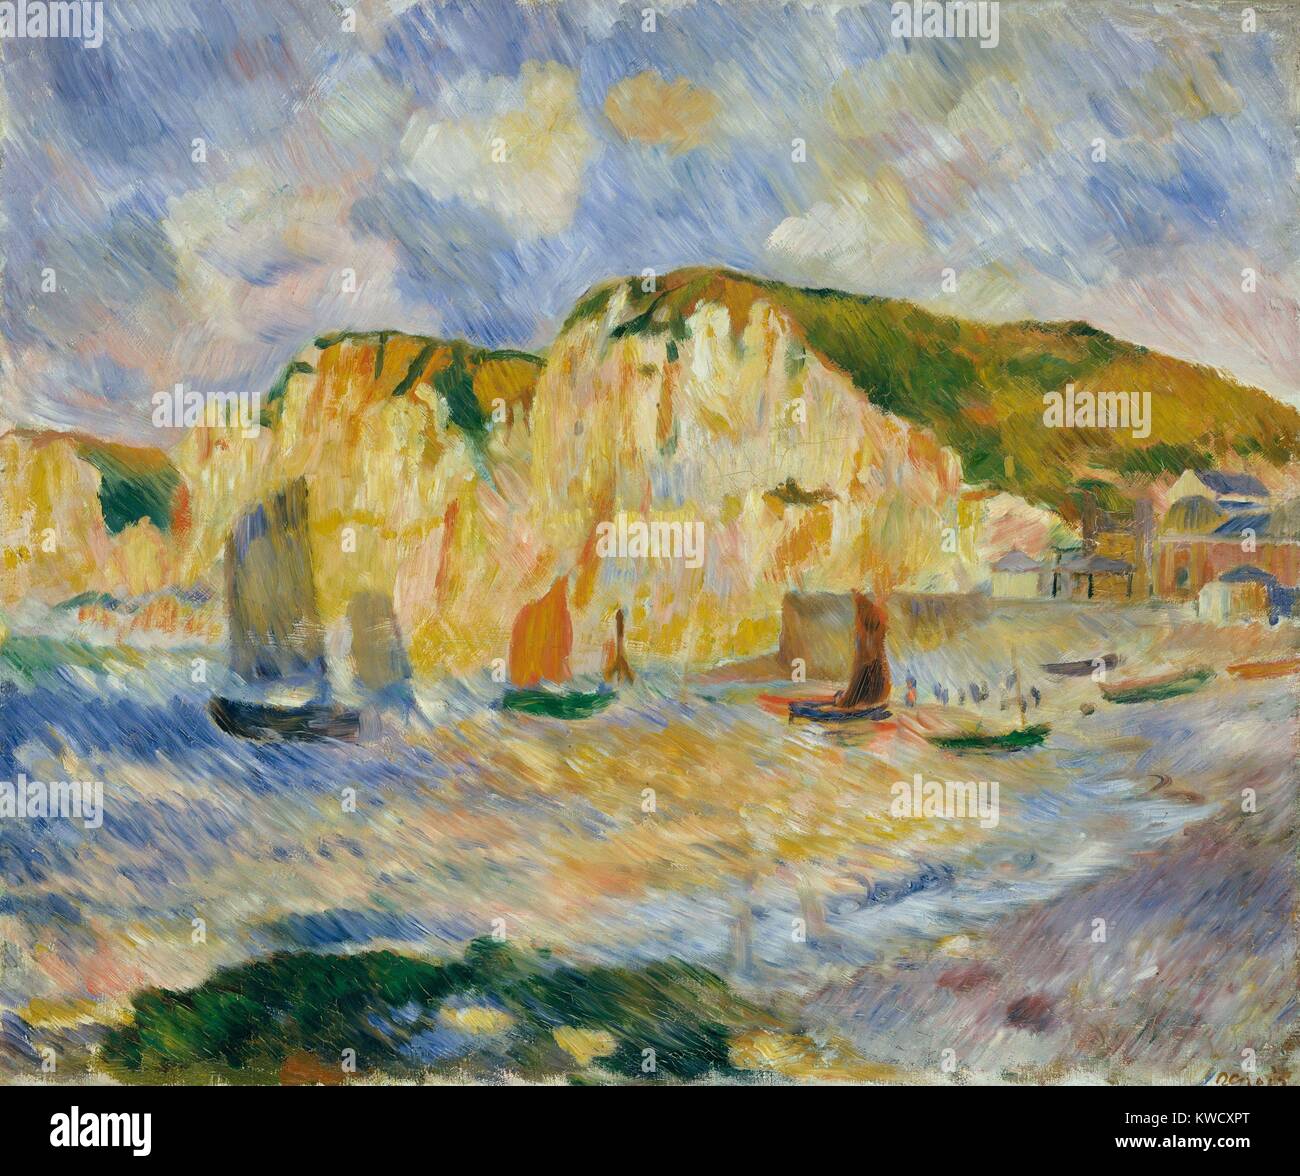 Sea and Cliffs, by Auguste Renoir, 1885, French impressionist painting, oil on canvas. Renoir painted this landscape with strong hatched straight brushstrokes (BSLOC 2017 3 90) Stock Photo